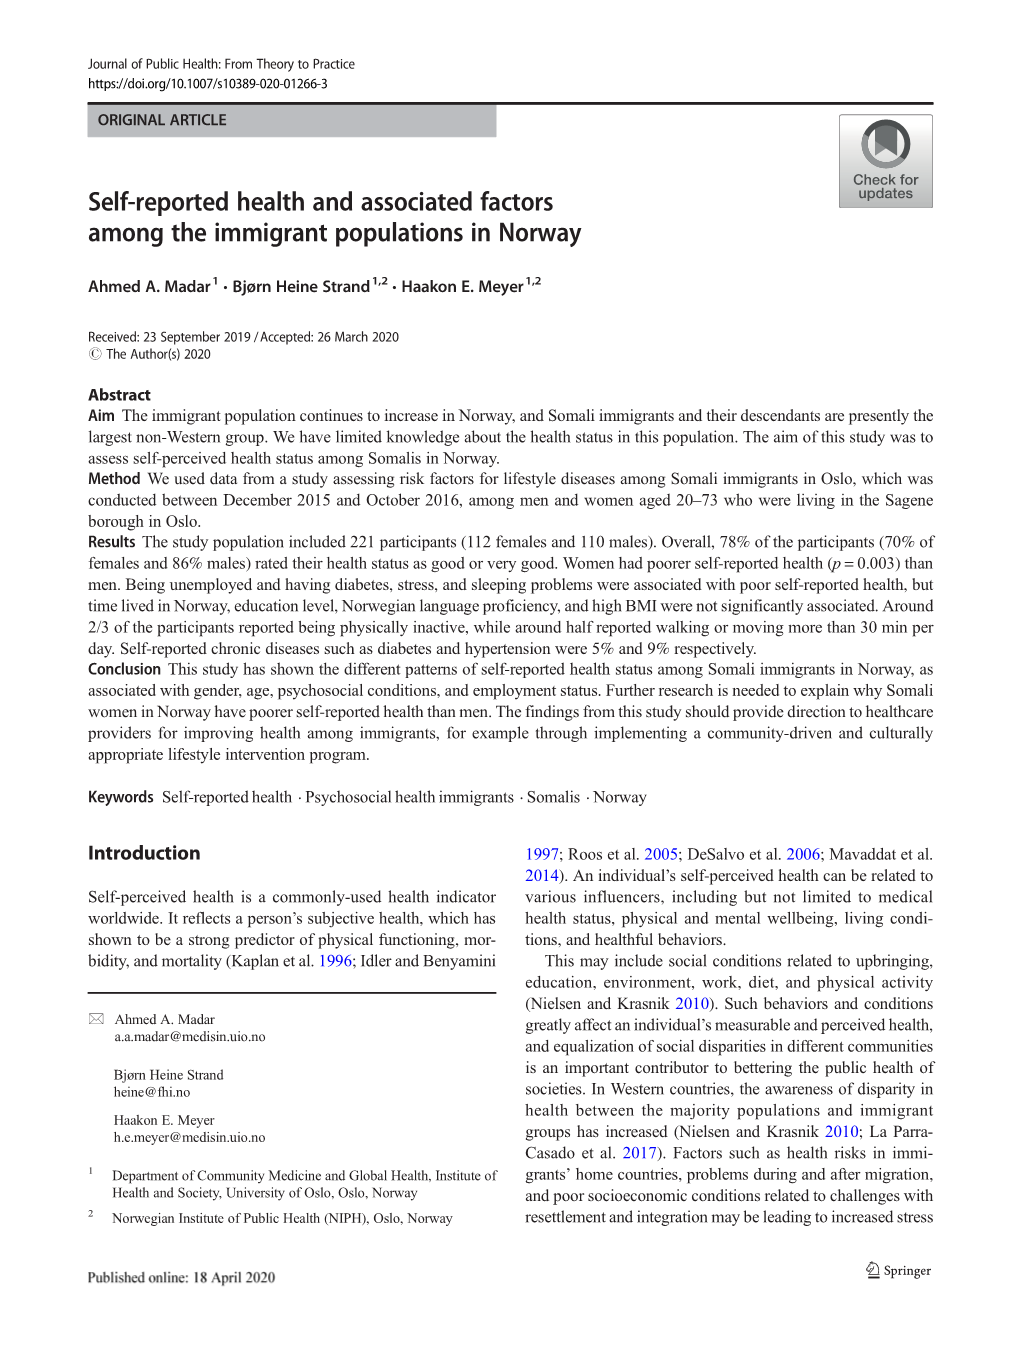 Self-Reported Health and Associated Factors Among the Immigrant Populations in Norway